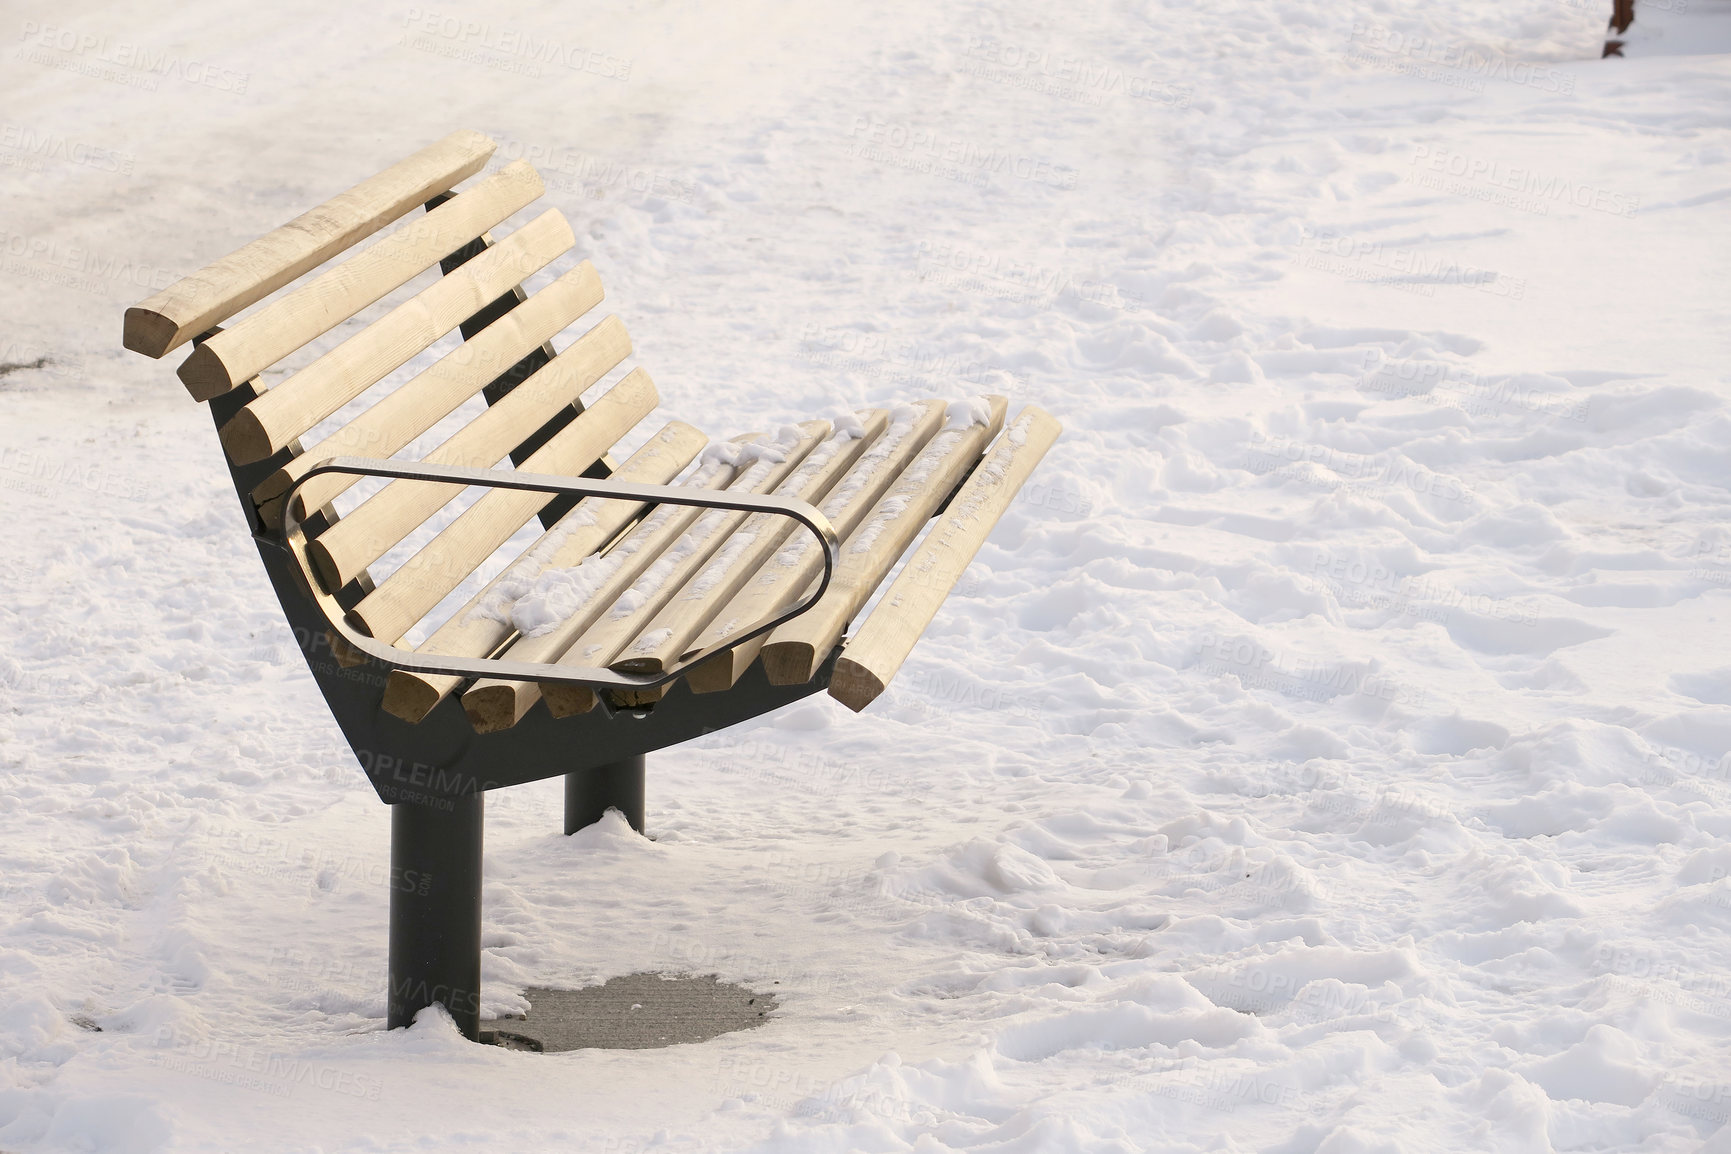 Buy stock photo Empty park bench in snow during winter in Denmark. Public chair in a park covered with snow in cold temperatures outside. Frozen outdoor seat for resting and sitting covered in ice in cold weather